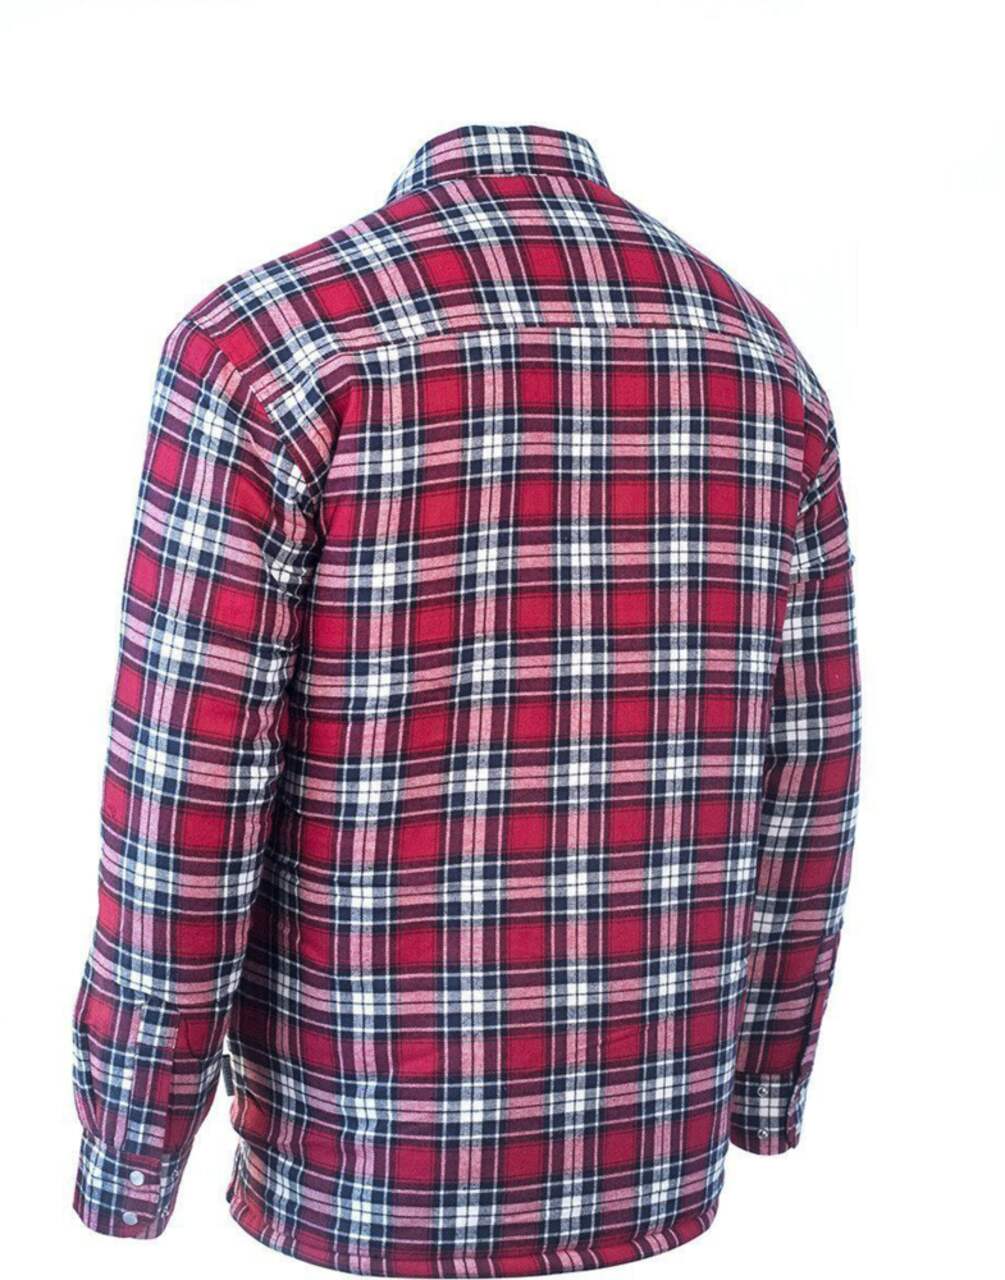 Forcefield Quilted Cotton Flannel Plaid Shirt for Fishing/Hiking